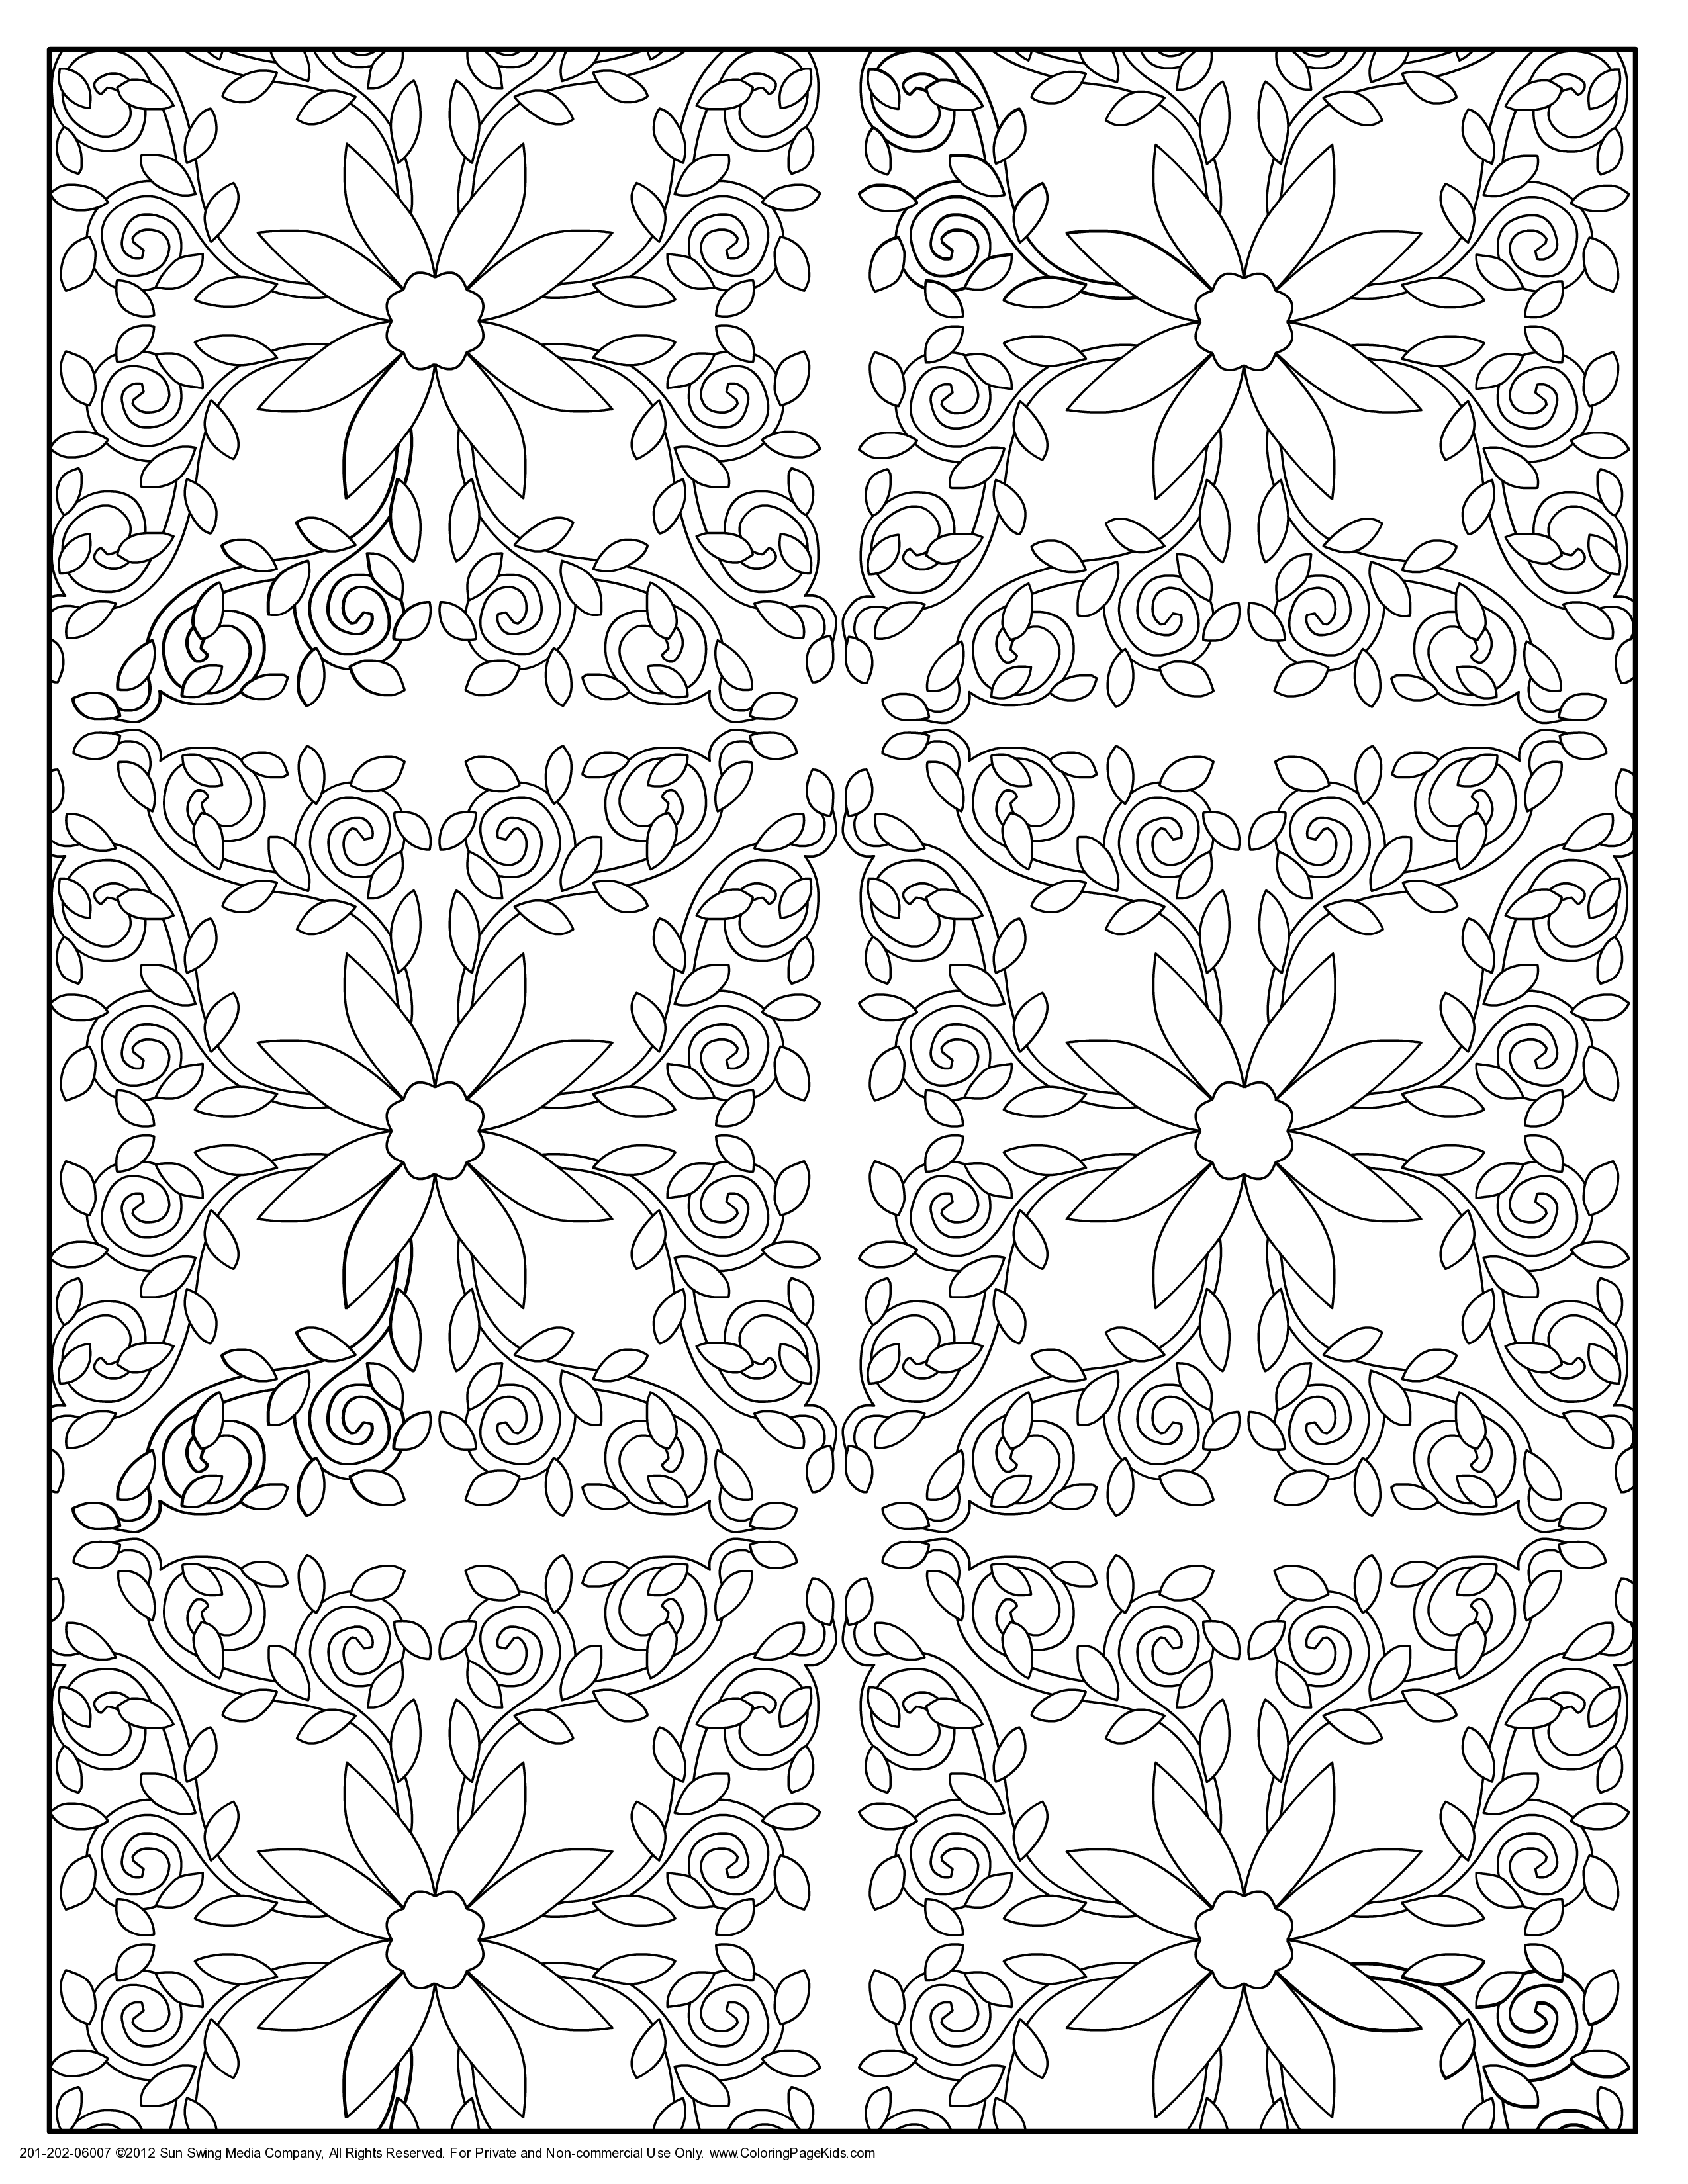 patterned coloring pages pattern coloring pages the sun flower pages pages coloring patterned 